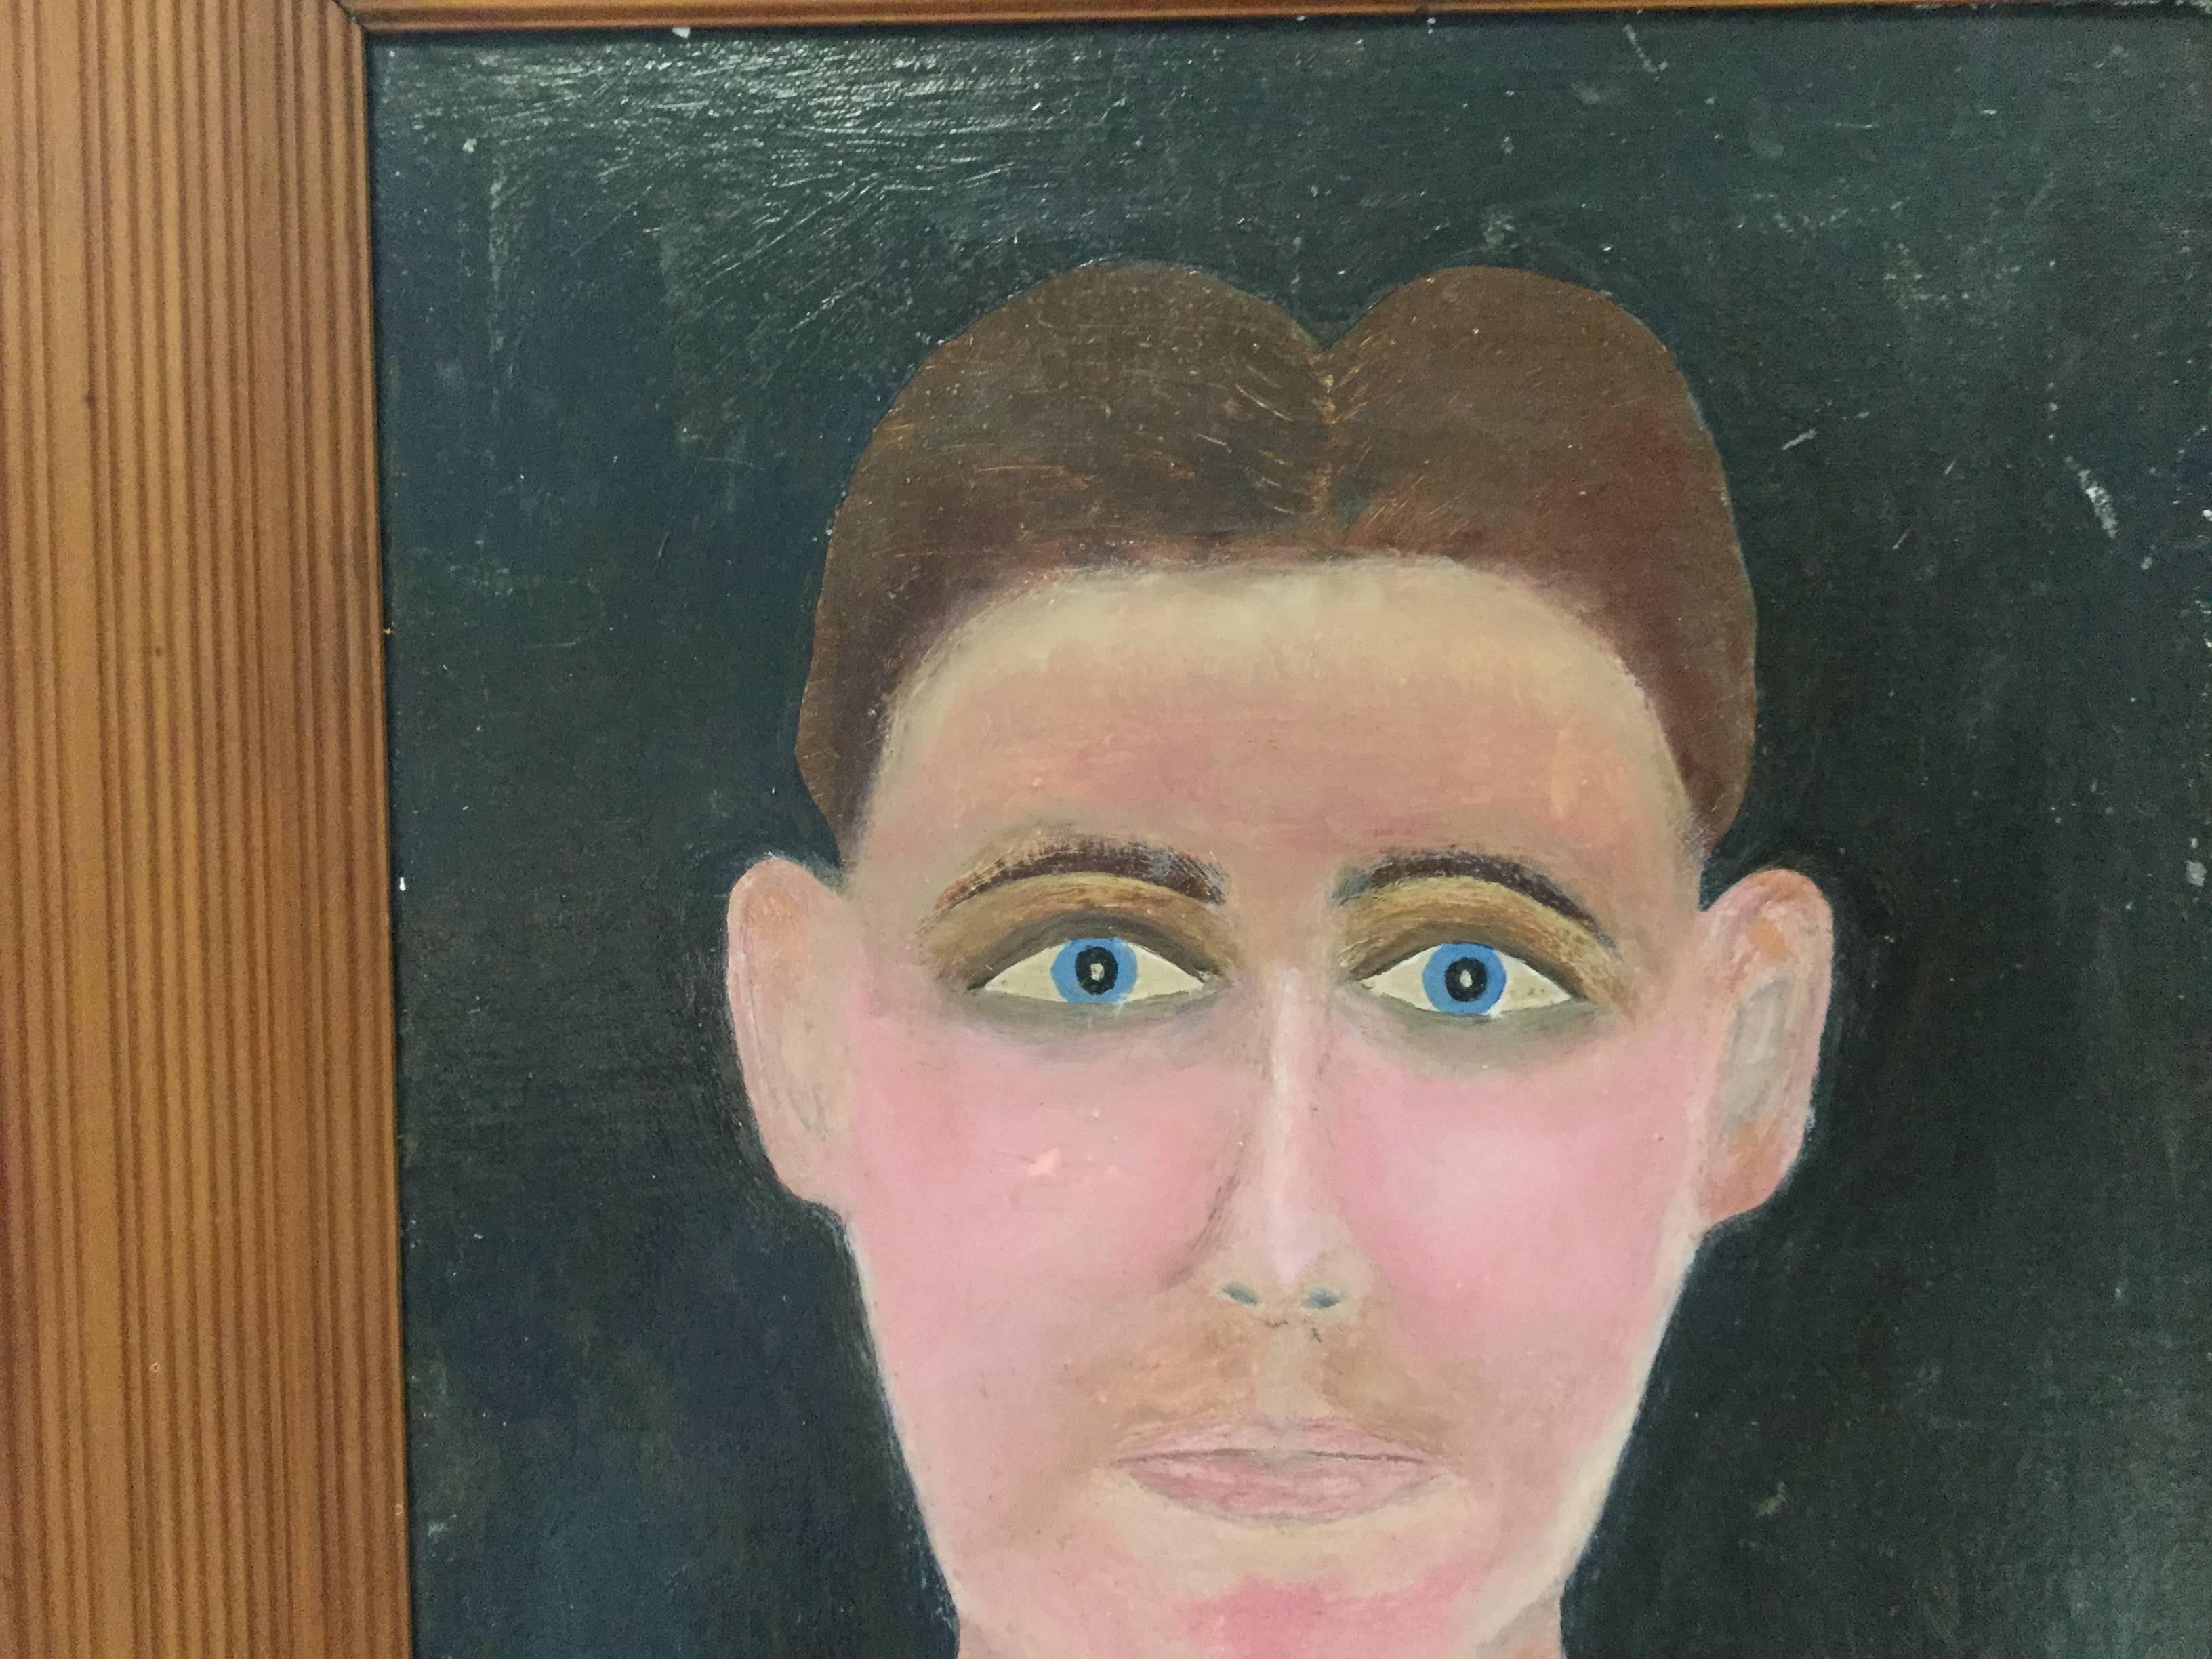 Folk Art or outsider portrait of a man in a blue tie. Very striking image. The earnestness with which it is painted is almost shocking, especially when you think of the cynicism in most contemporary work.